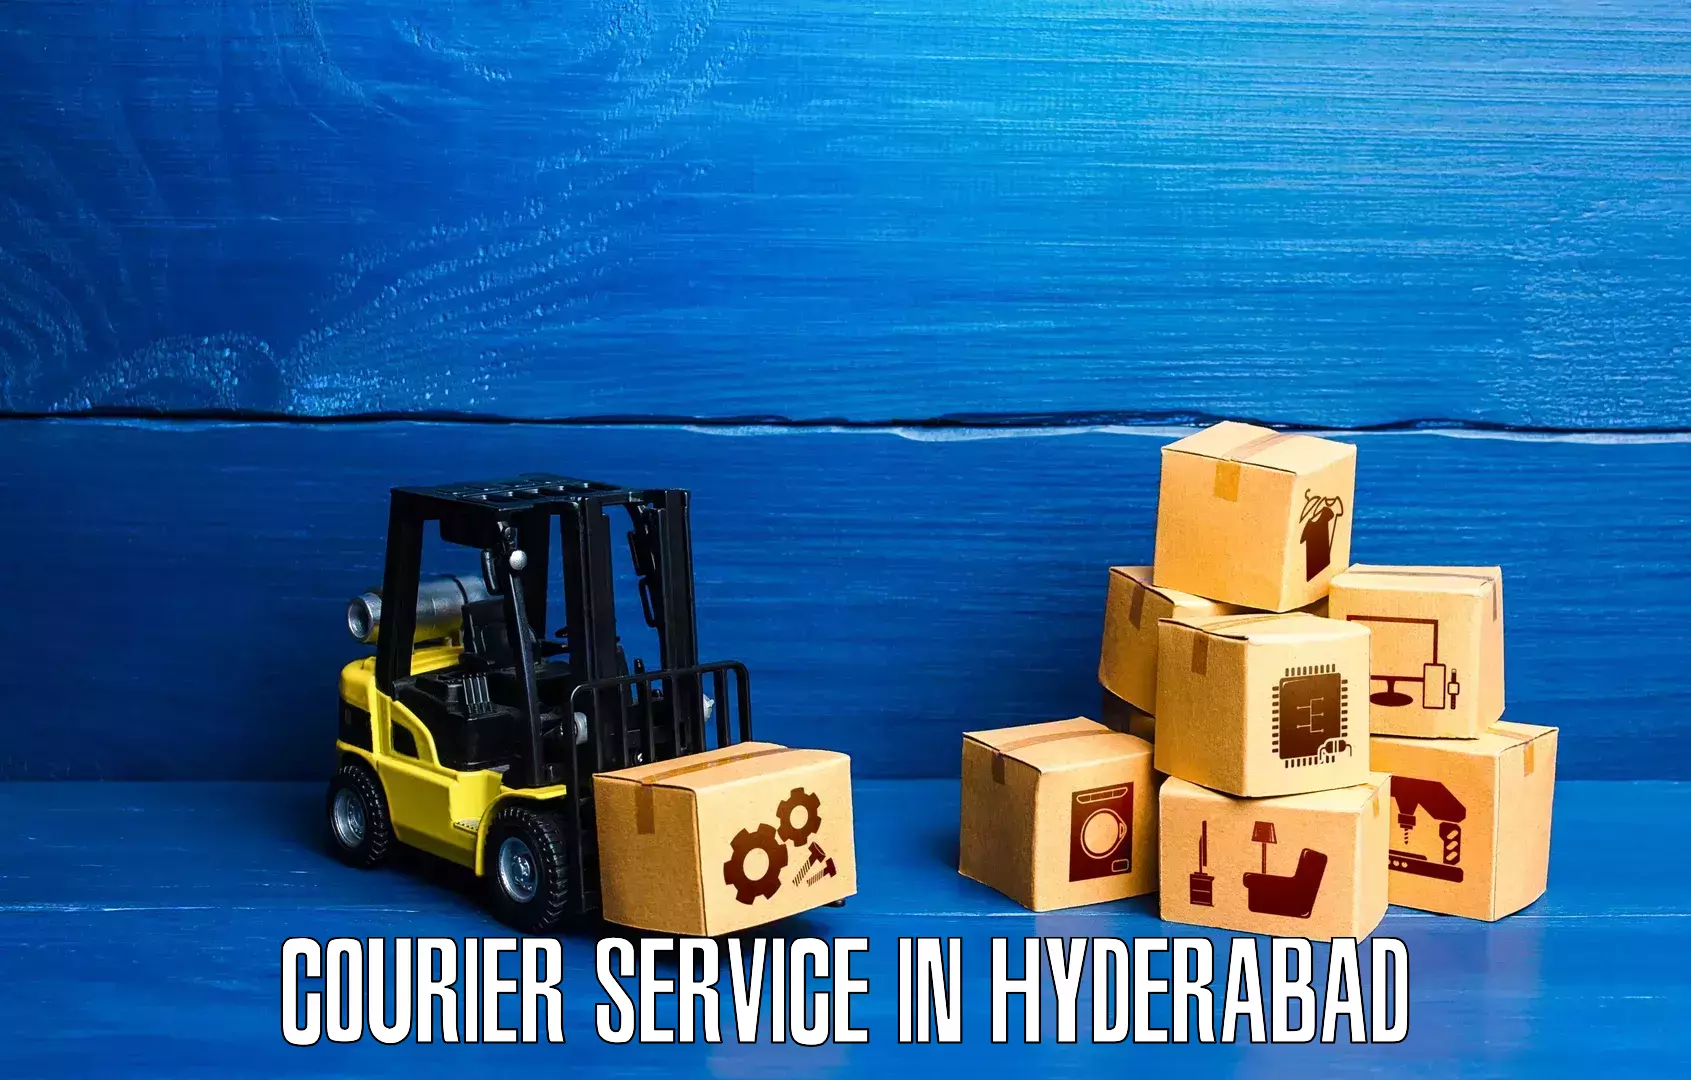 Comprehensive shipping network in Hyderabad